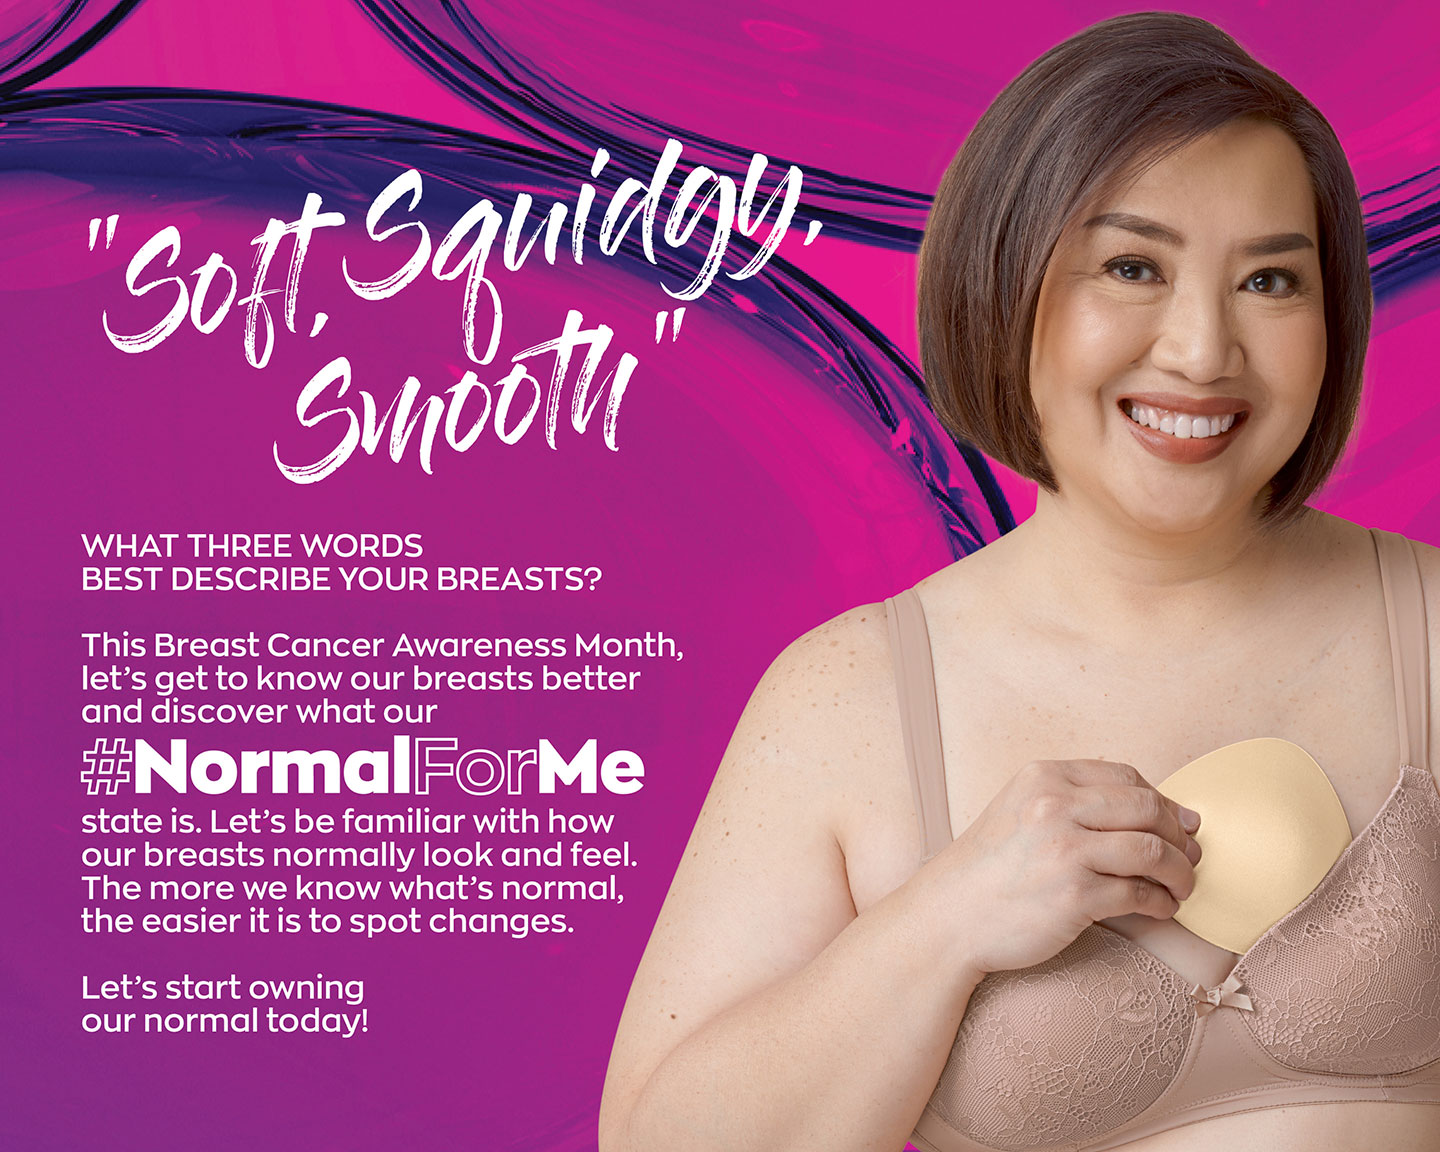 Avon launches 'Normal For Me' campaign, marks 30th year in its